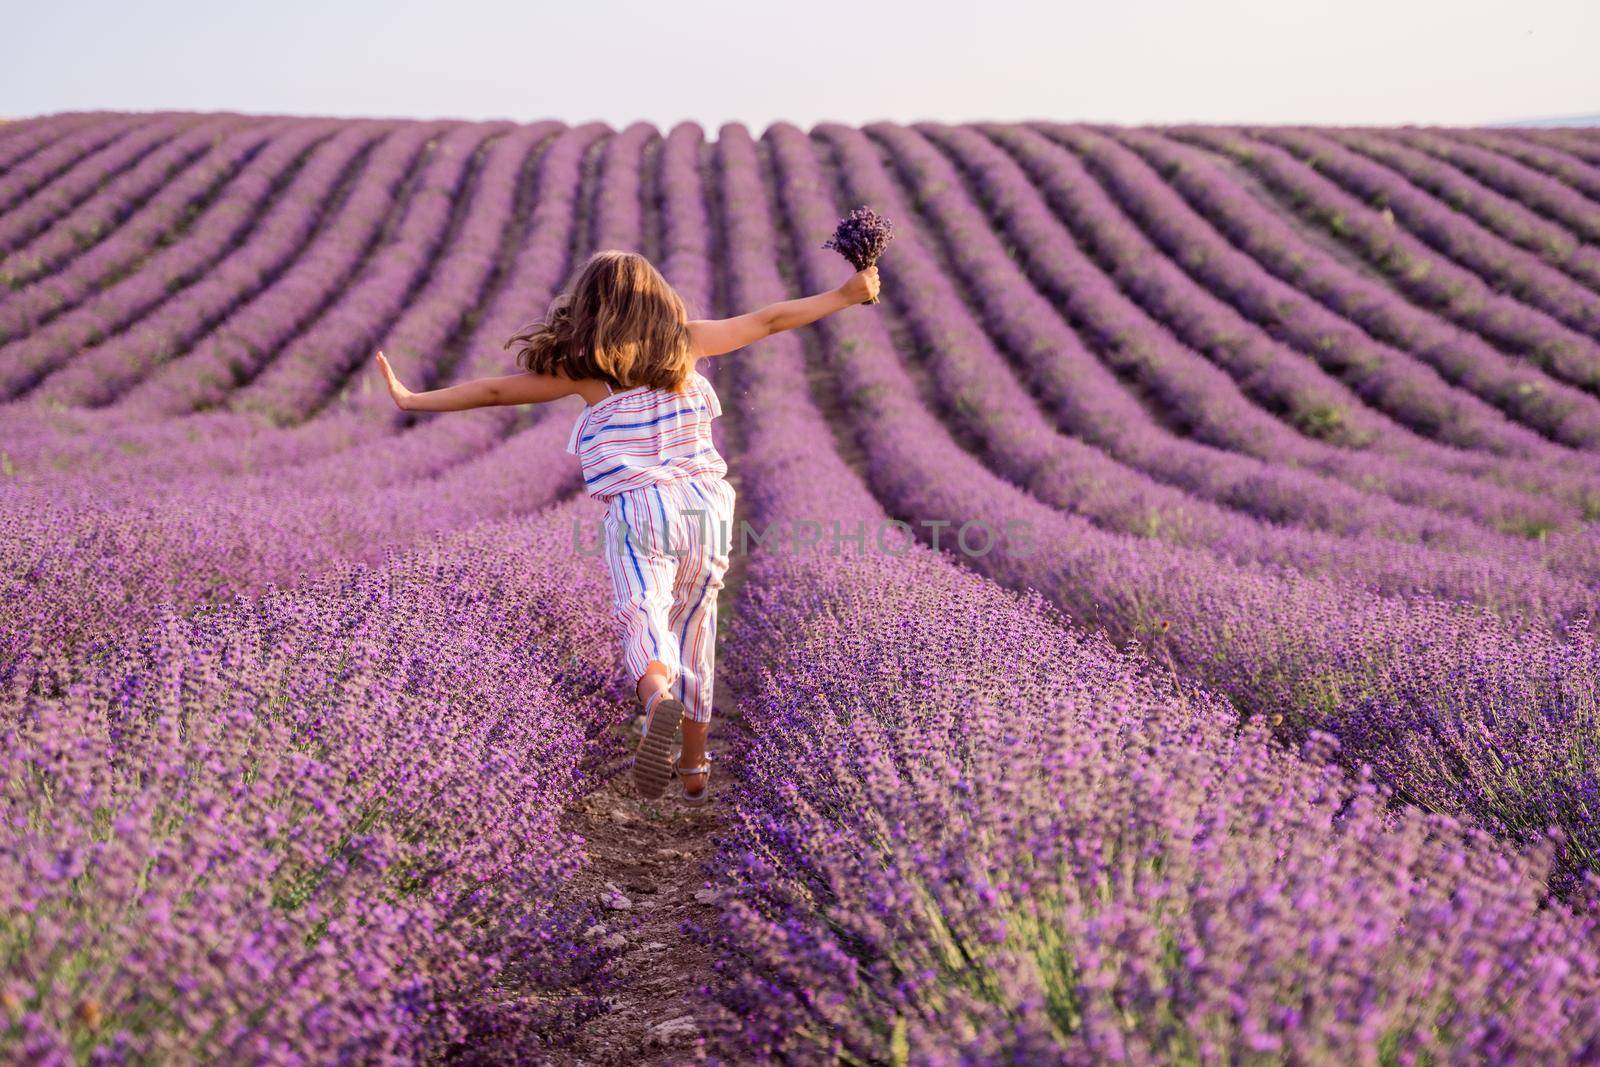 Among the lavender fields. A beautiful girl runs against the background of a large lavender field by Matiunina